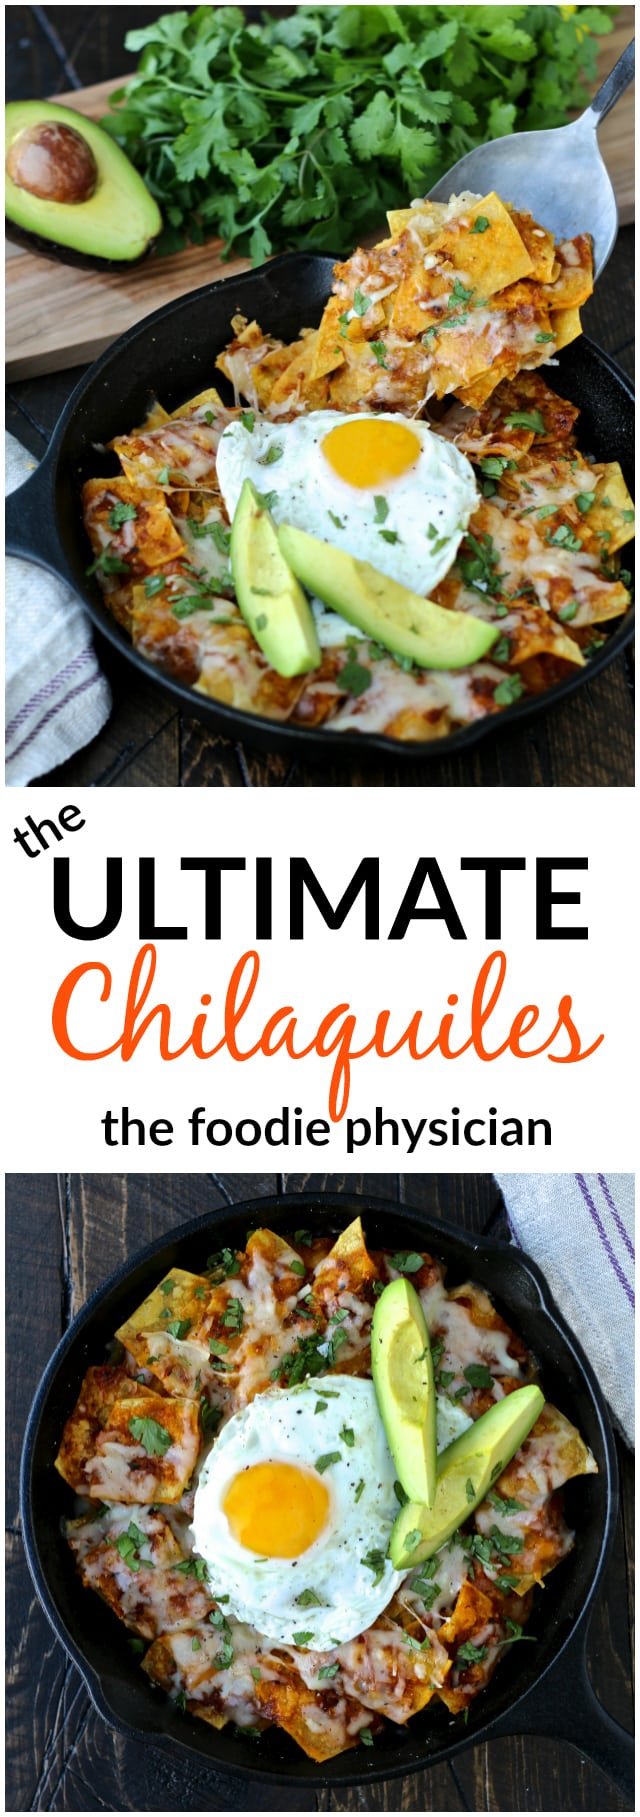 The Ultimate Chilaquiles | @foodiephysician